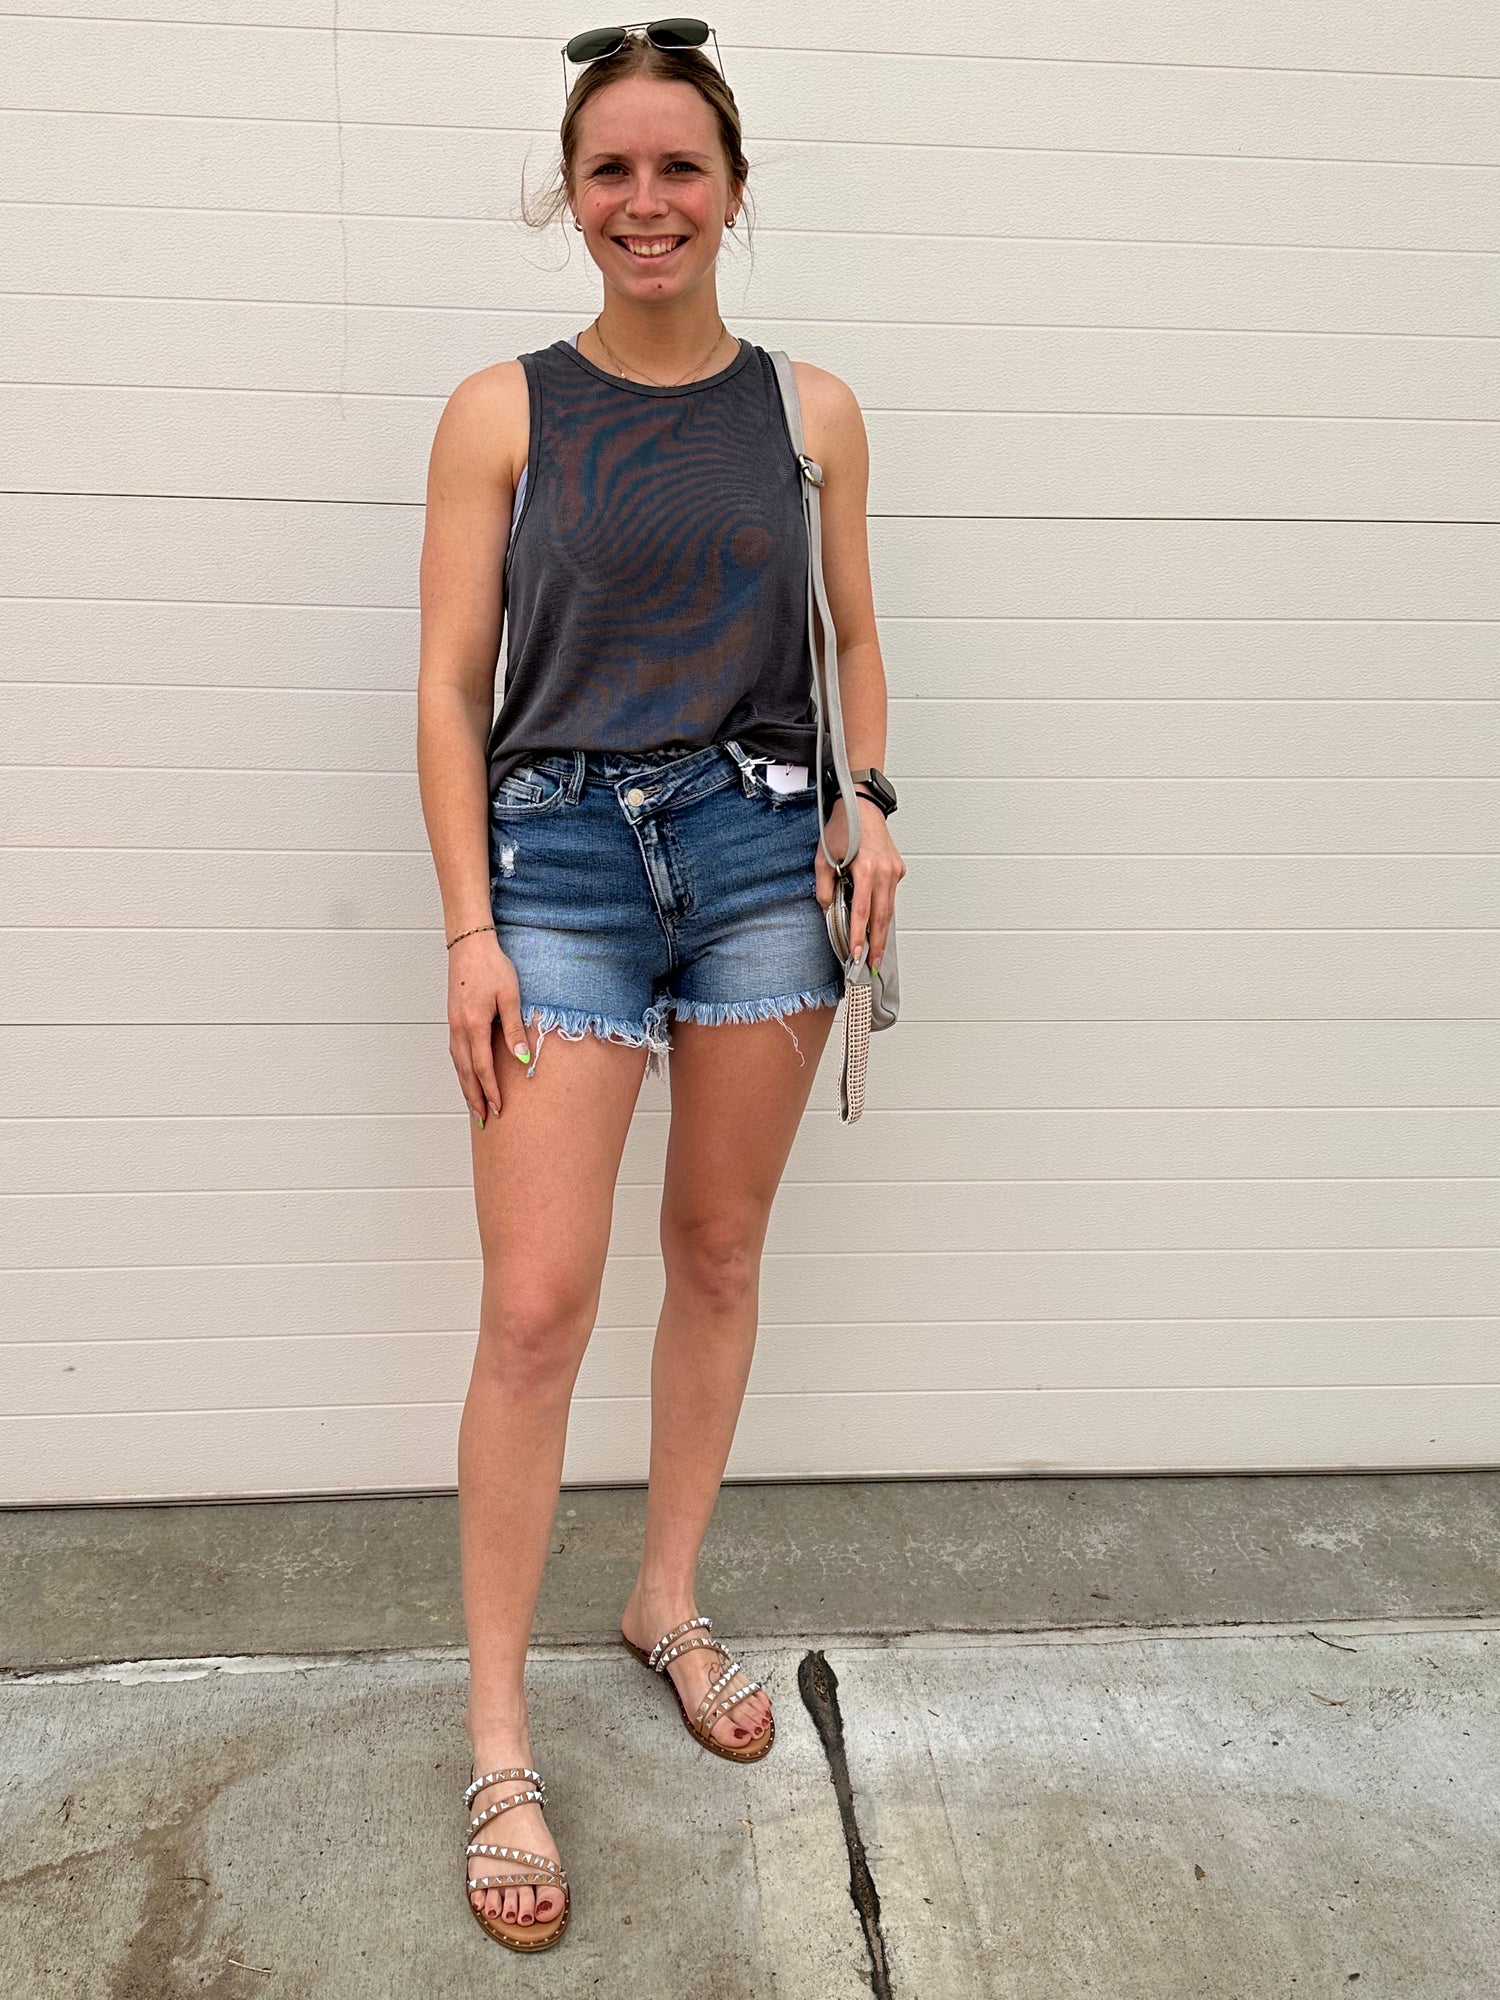 These Rebecca Denim Shorts are perfect for taking your casual look to the next level! Lightly distressed and featuring a criss cross waistband, this piece of denim brings just the right amount of sass to any outfit. Go on, show &